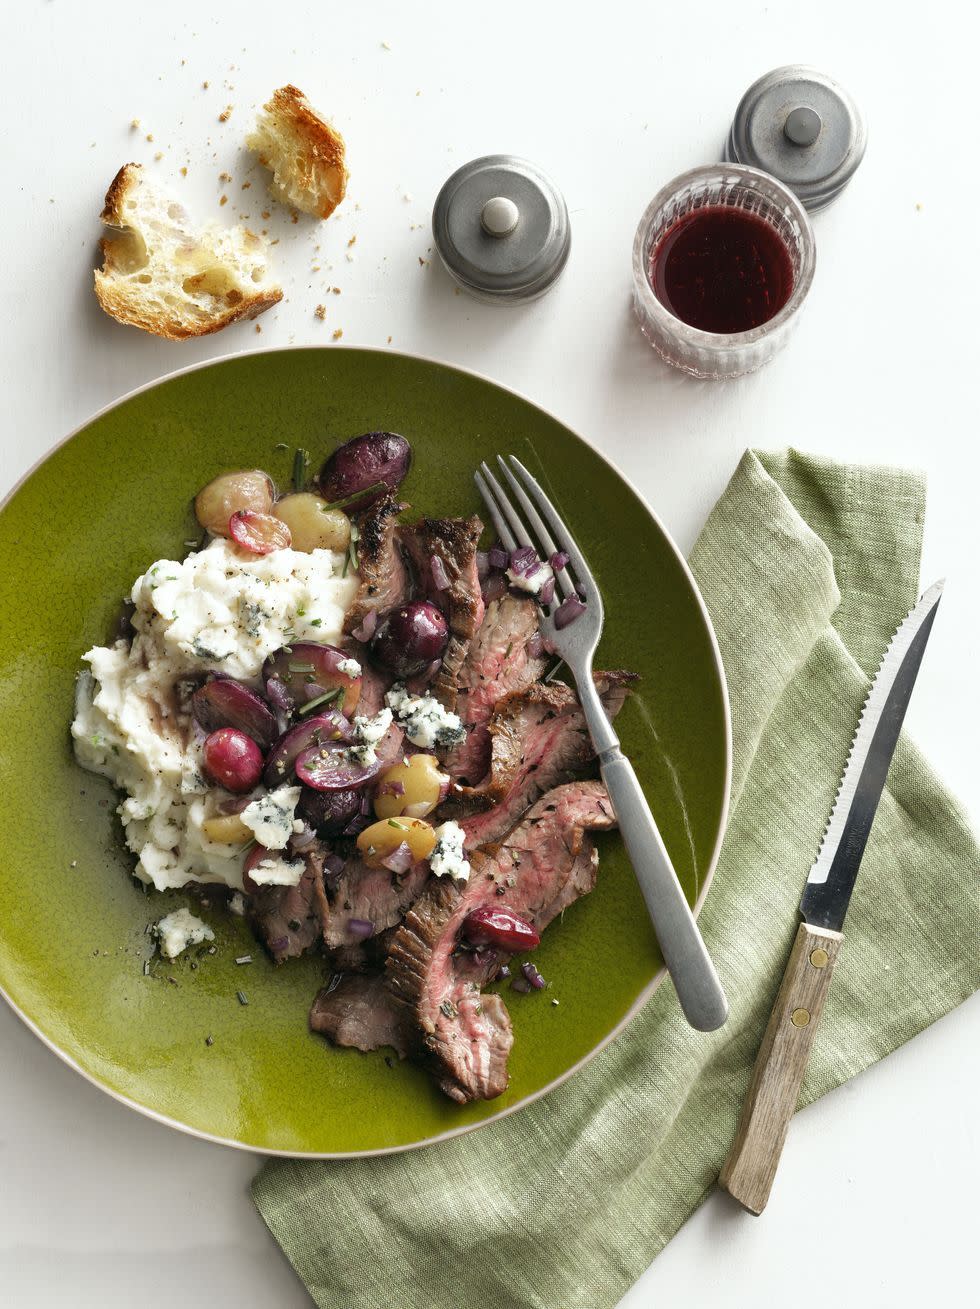 herbgarlic crusted flank steak with panroasted grapes